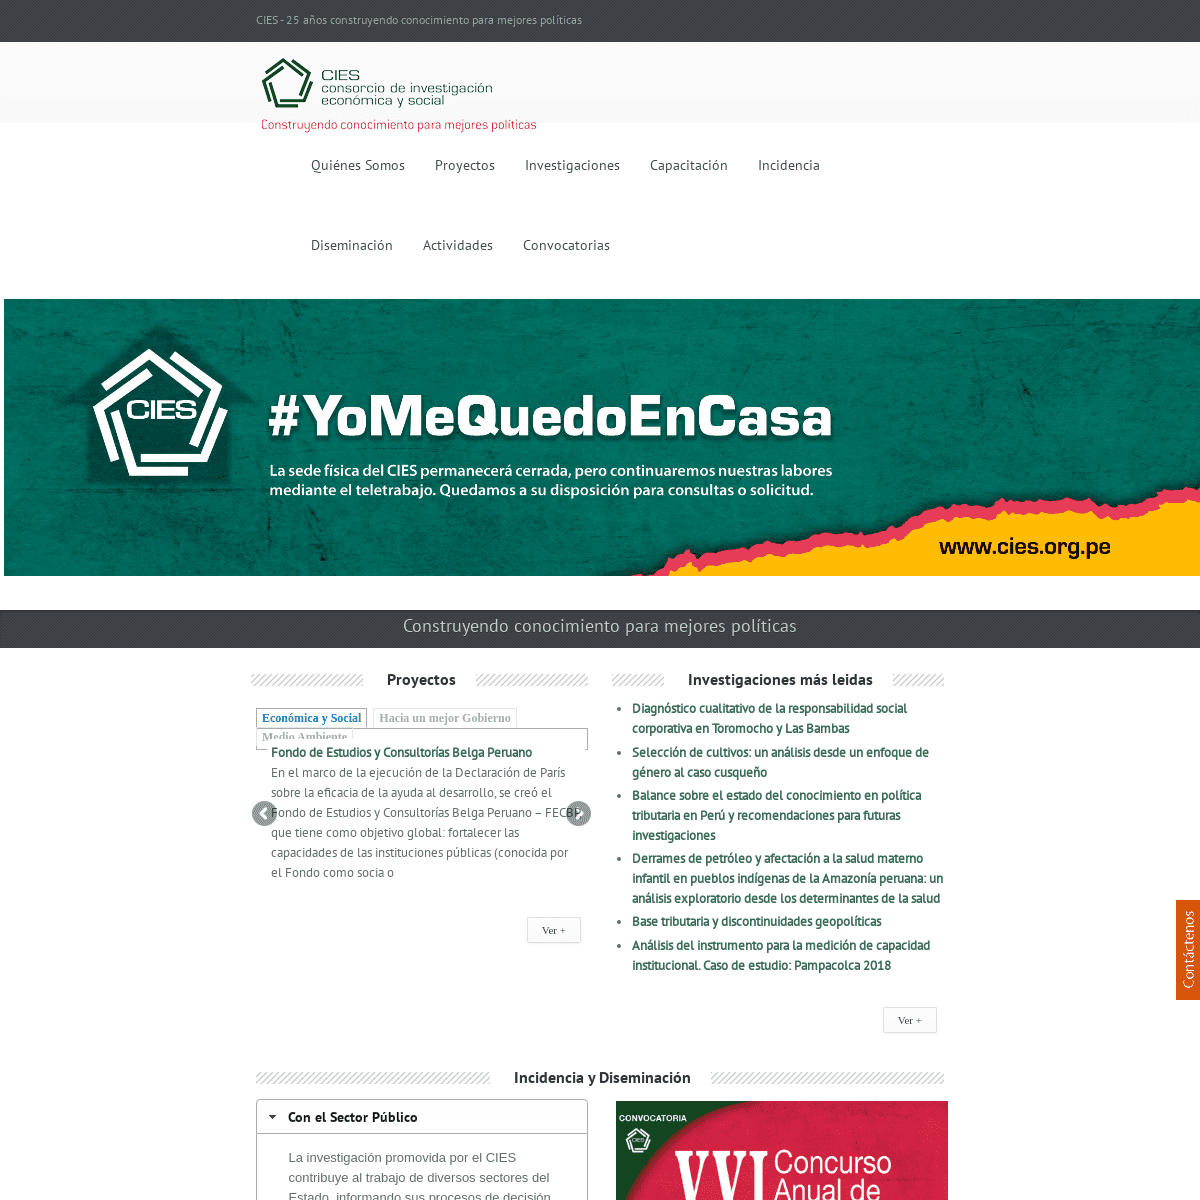 A complete backup of cies.org.pe